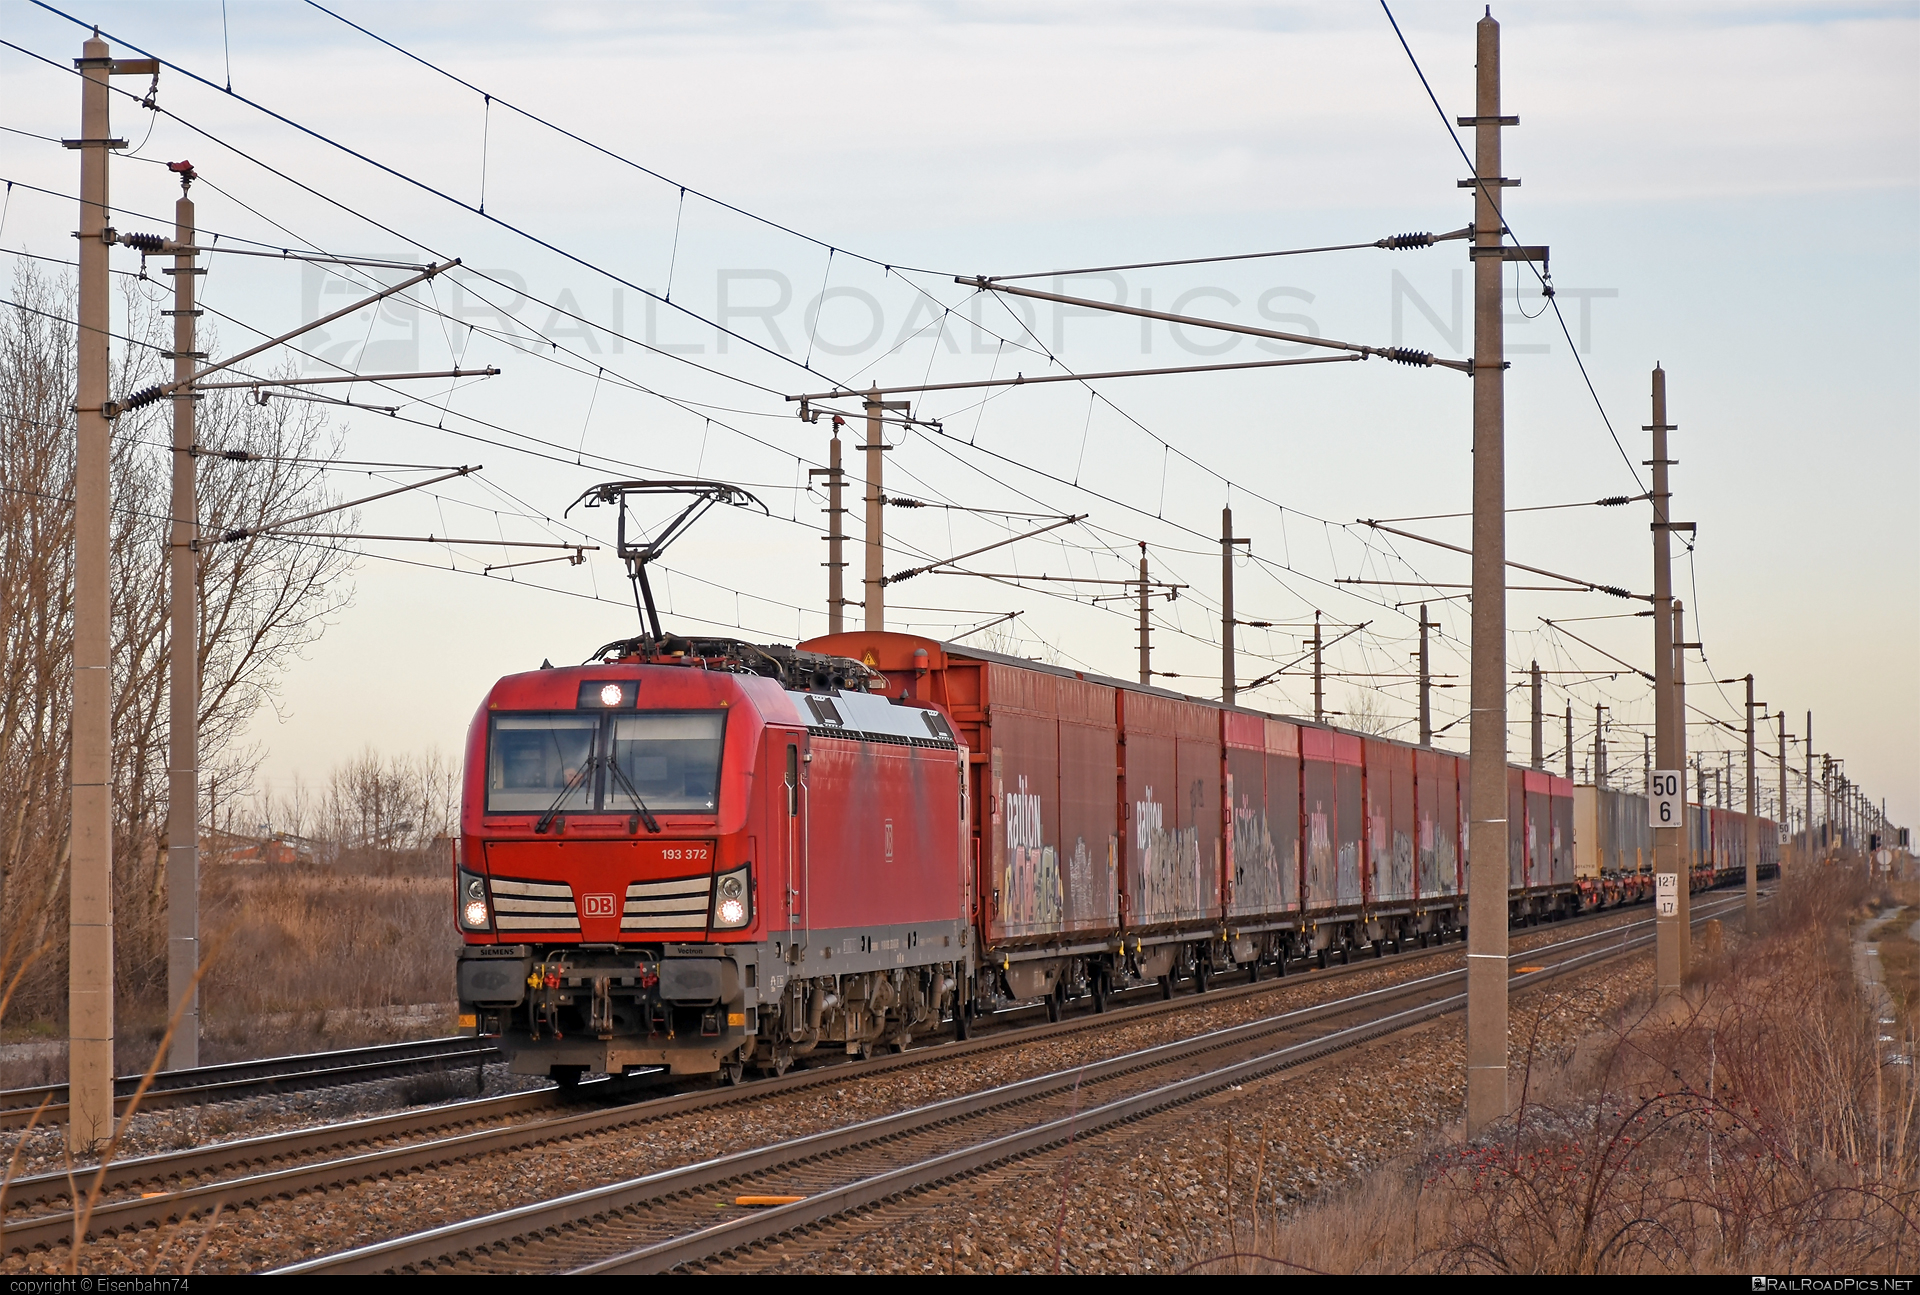 Siemens Vectron MS - 193 372 operated by DB Cargo AG #db #dbcargo #dbcargoag #deutschebahn #siemens #siemensVectron #siemensVectronMS #vectron #vectronMS